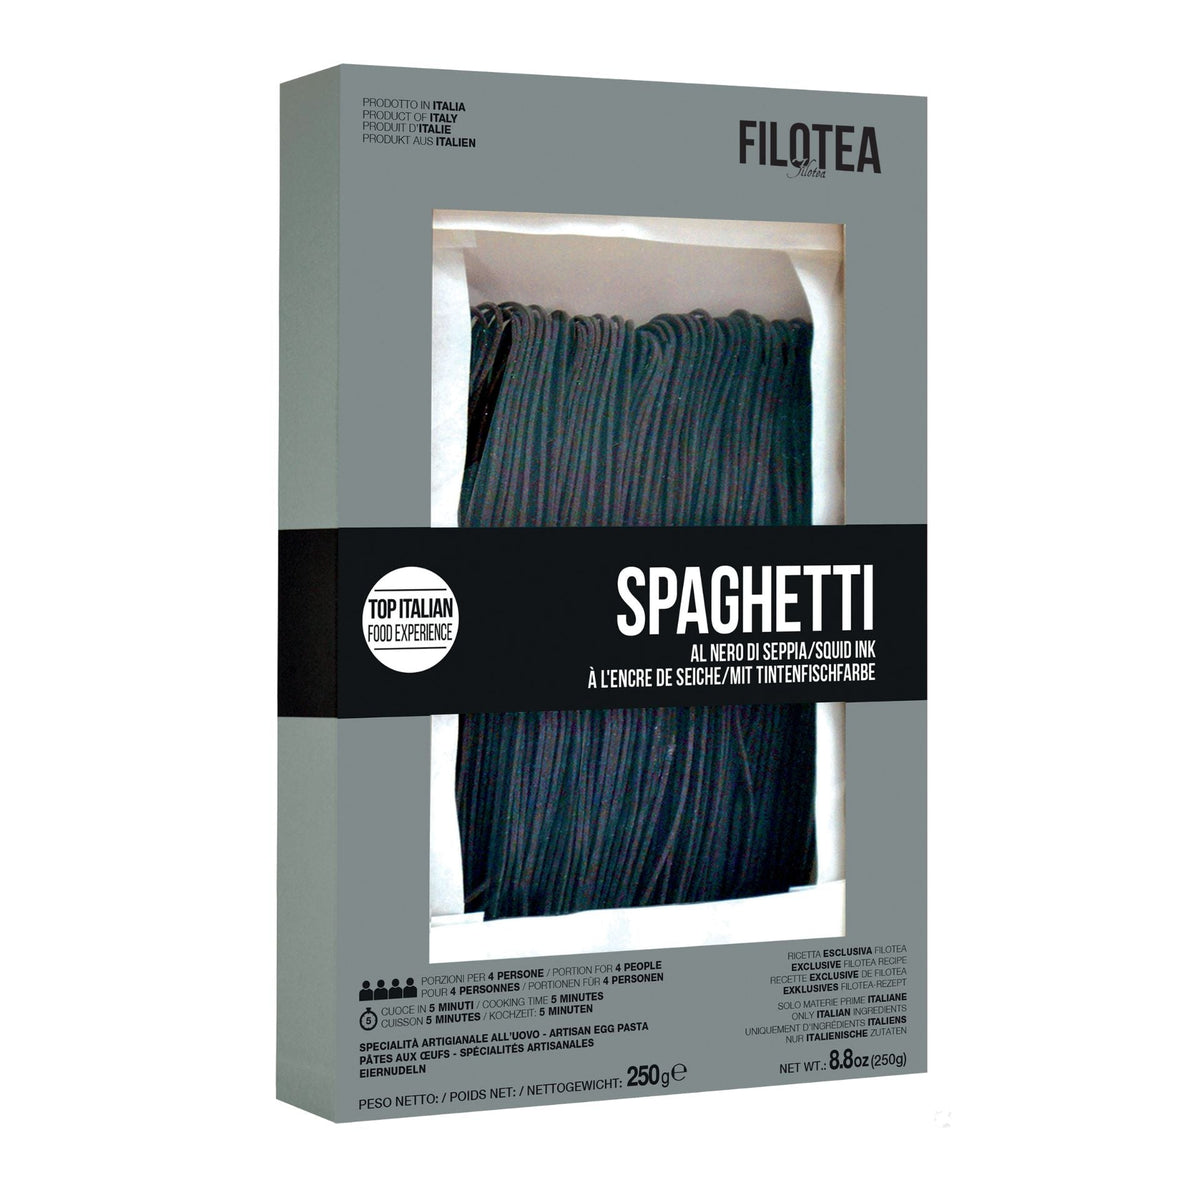 Filotea Squid Ink Spaghetti alla Chitarra Artisan Egg Pasta 250g  | Imported and distributed in the UK by Just Gourmet Foods